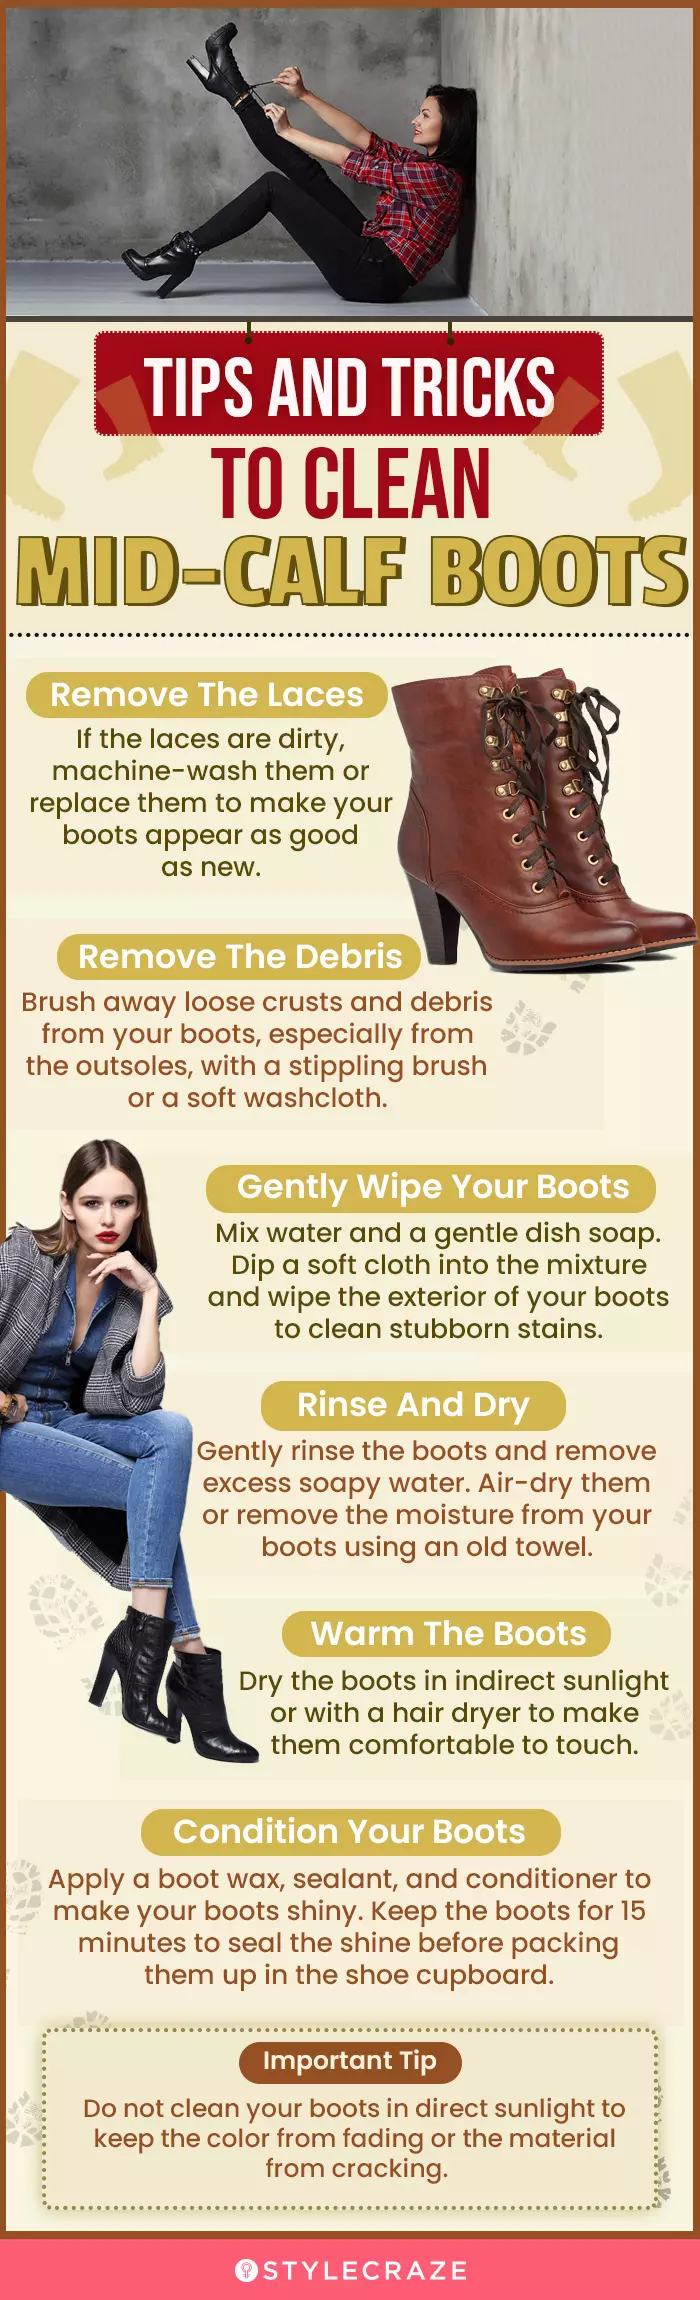 Tips & Tricks On How To Clean Mid-Calf Boots (infographic)